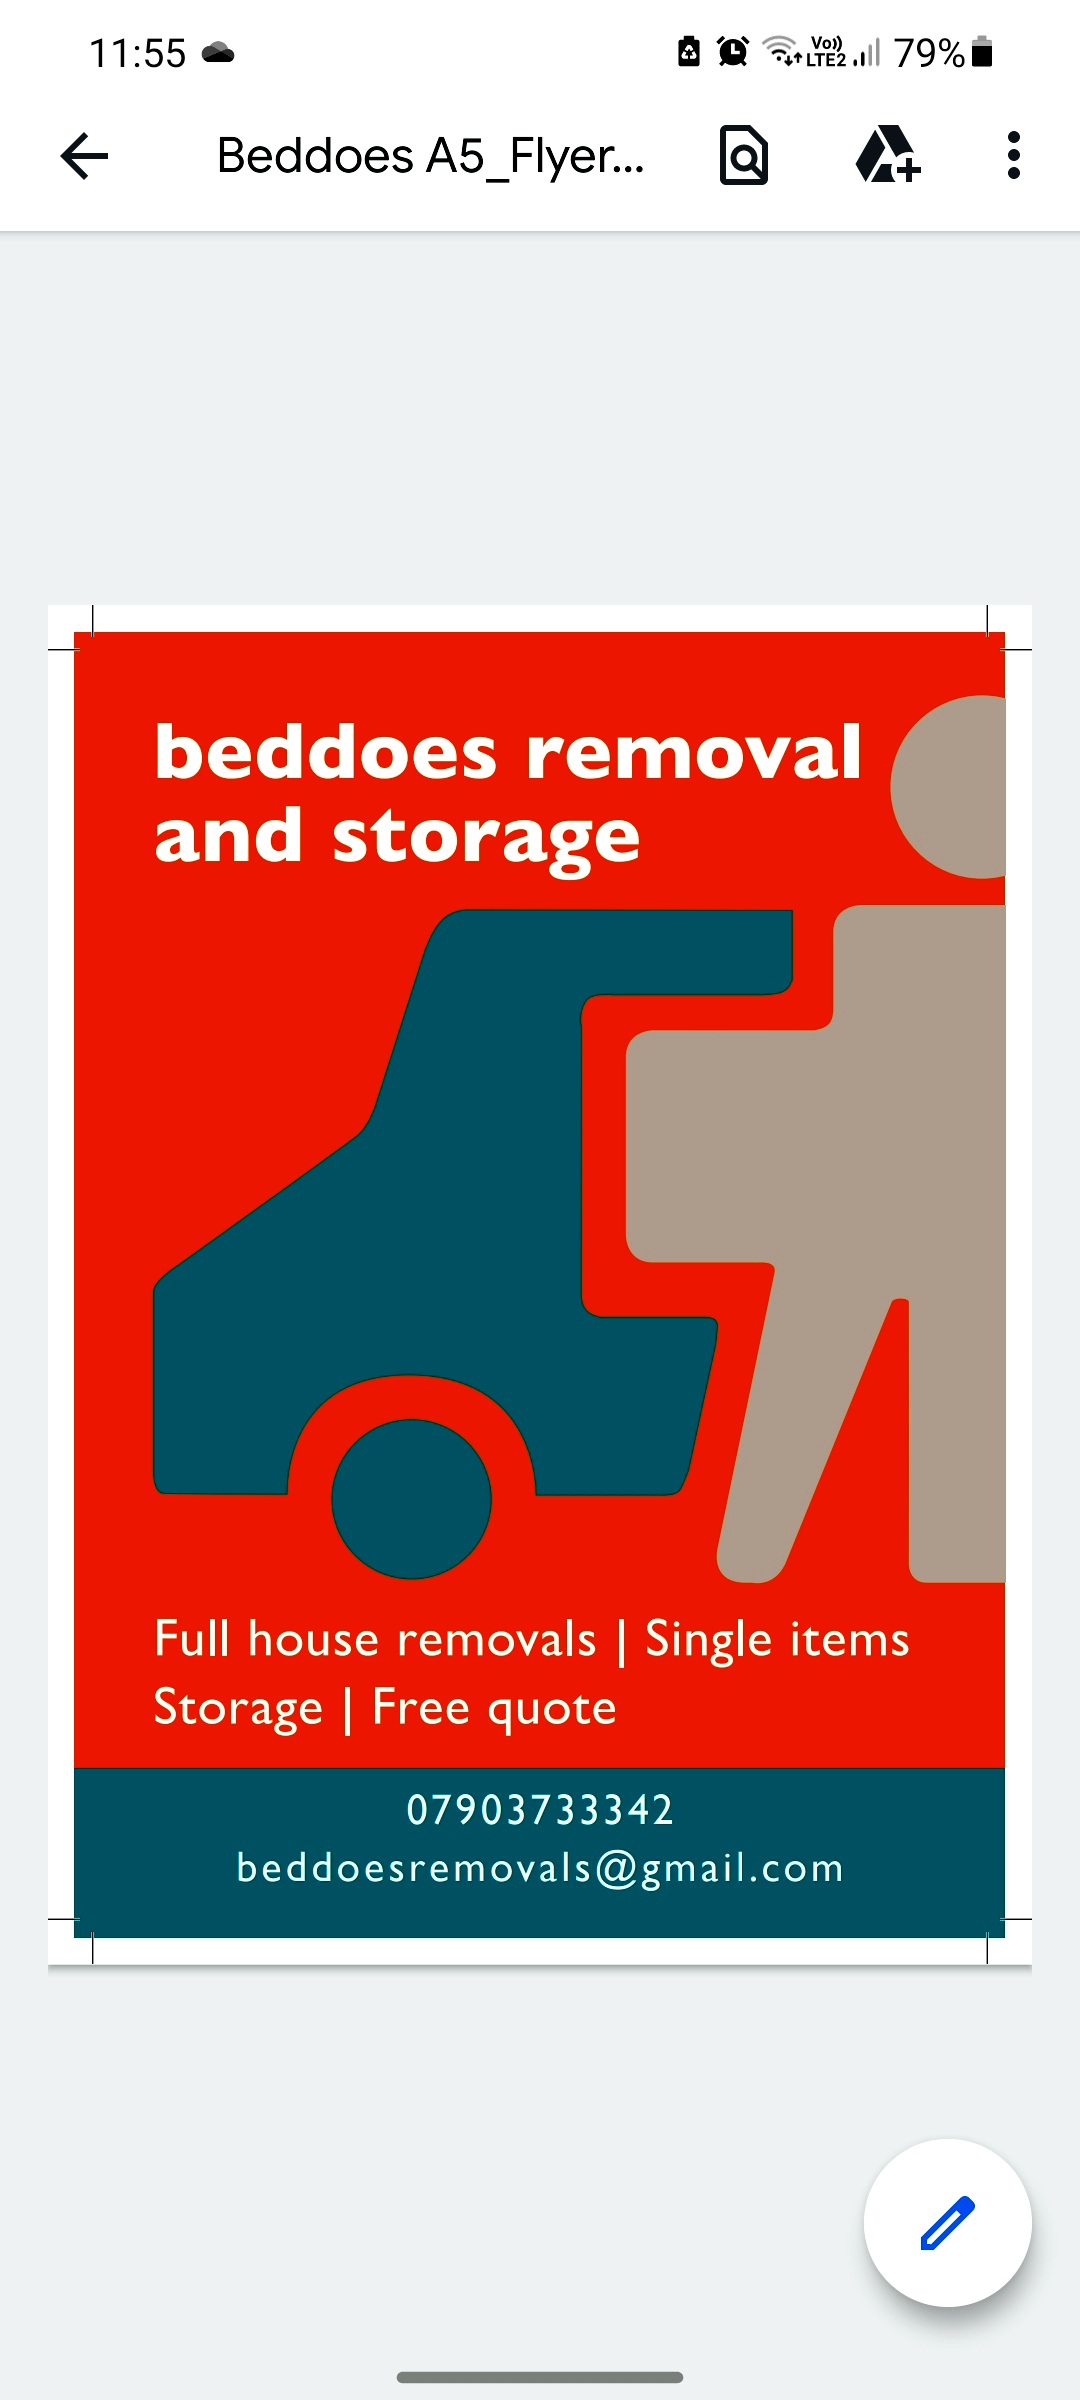 Beddoes removals